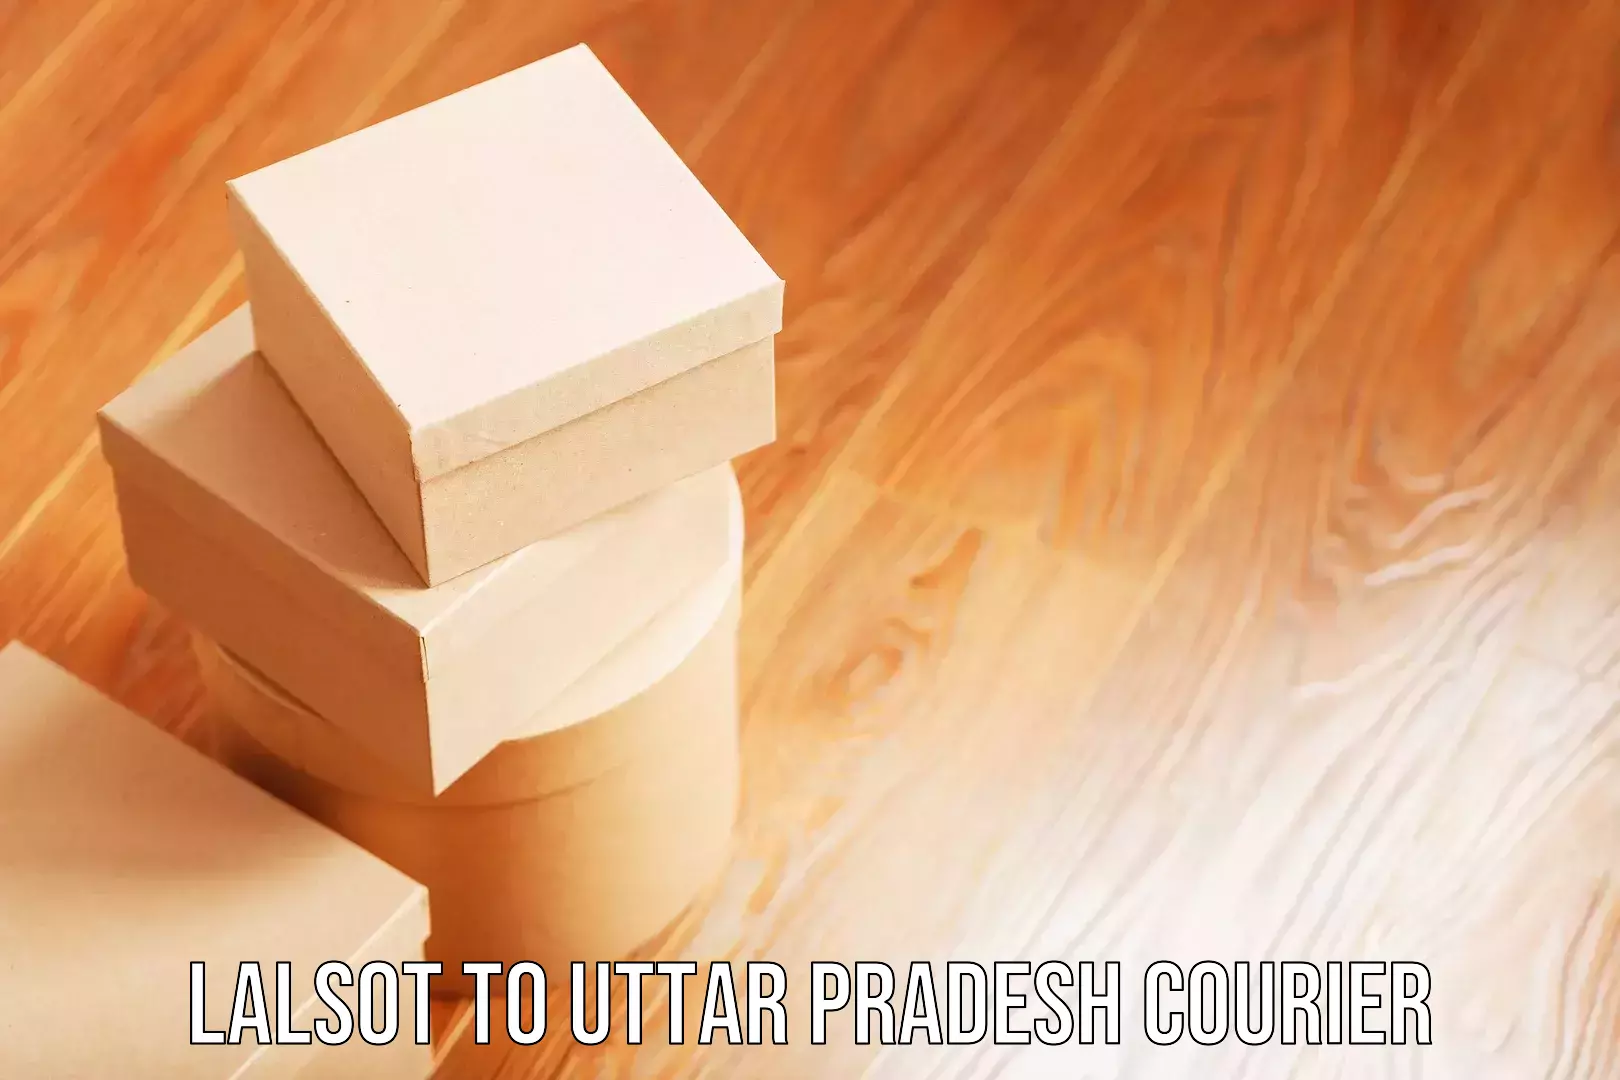 Luggage shipment specialists Lalsot to Uttar Pradesh